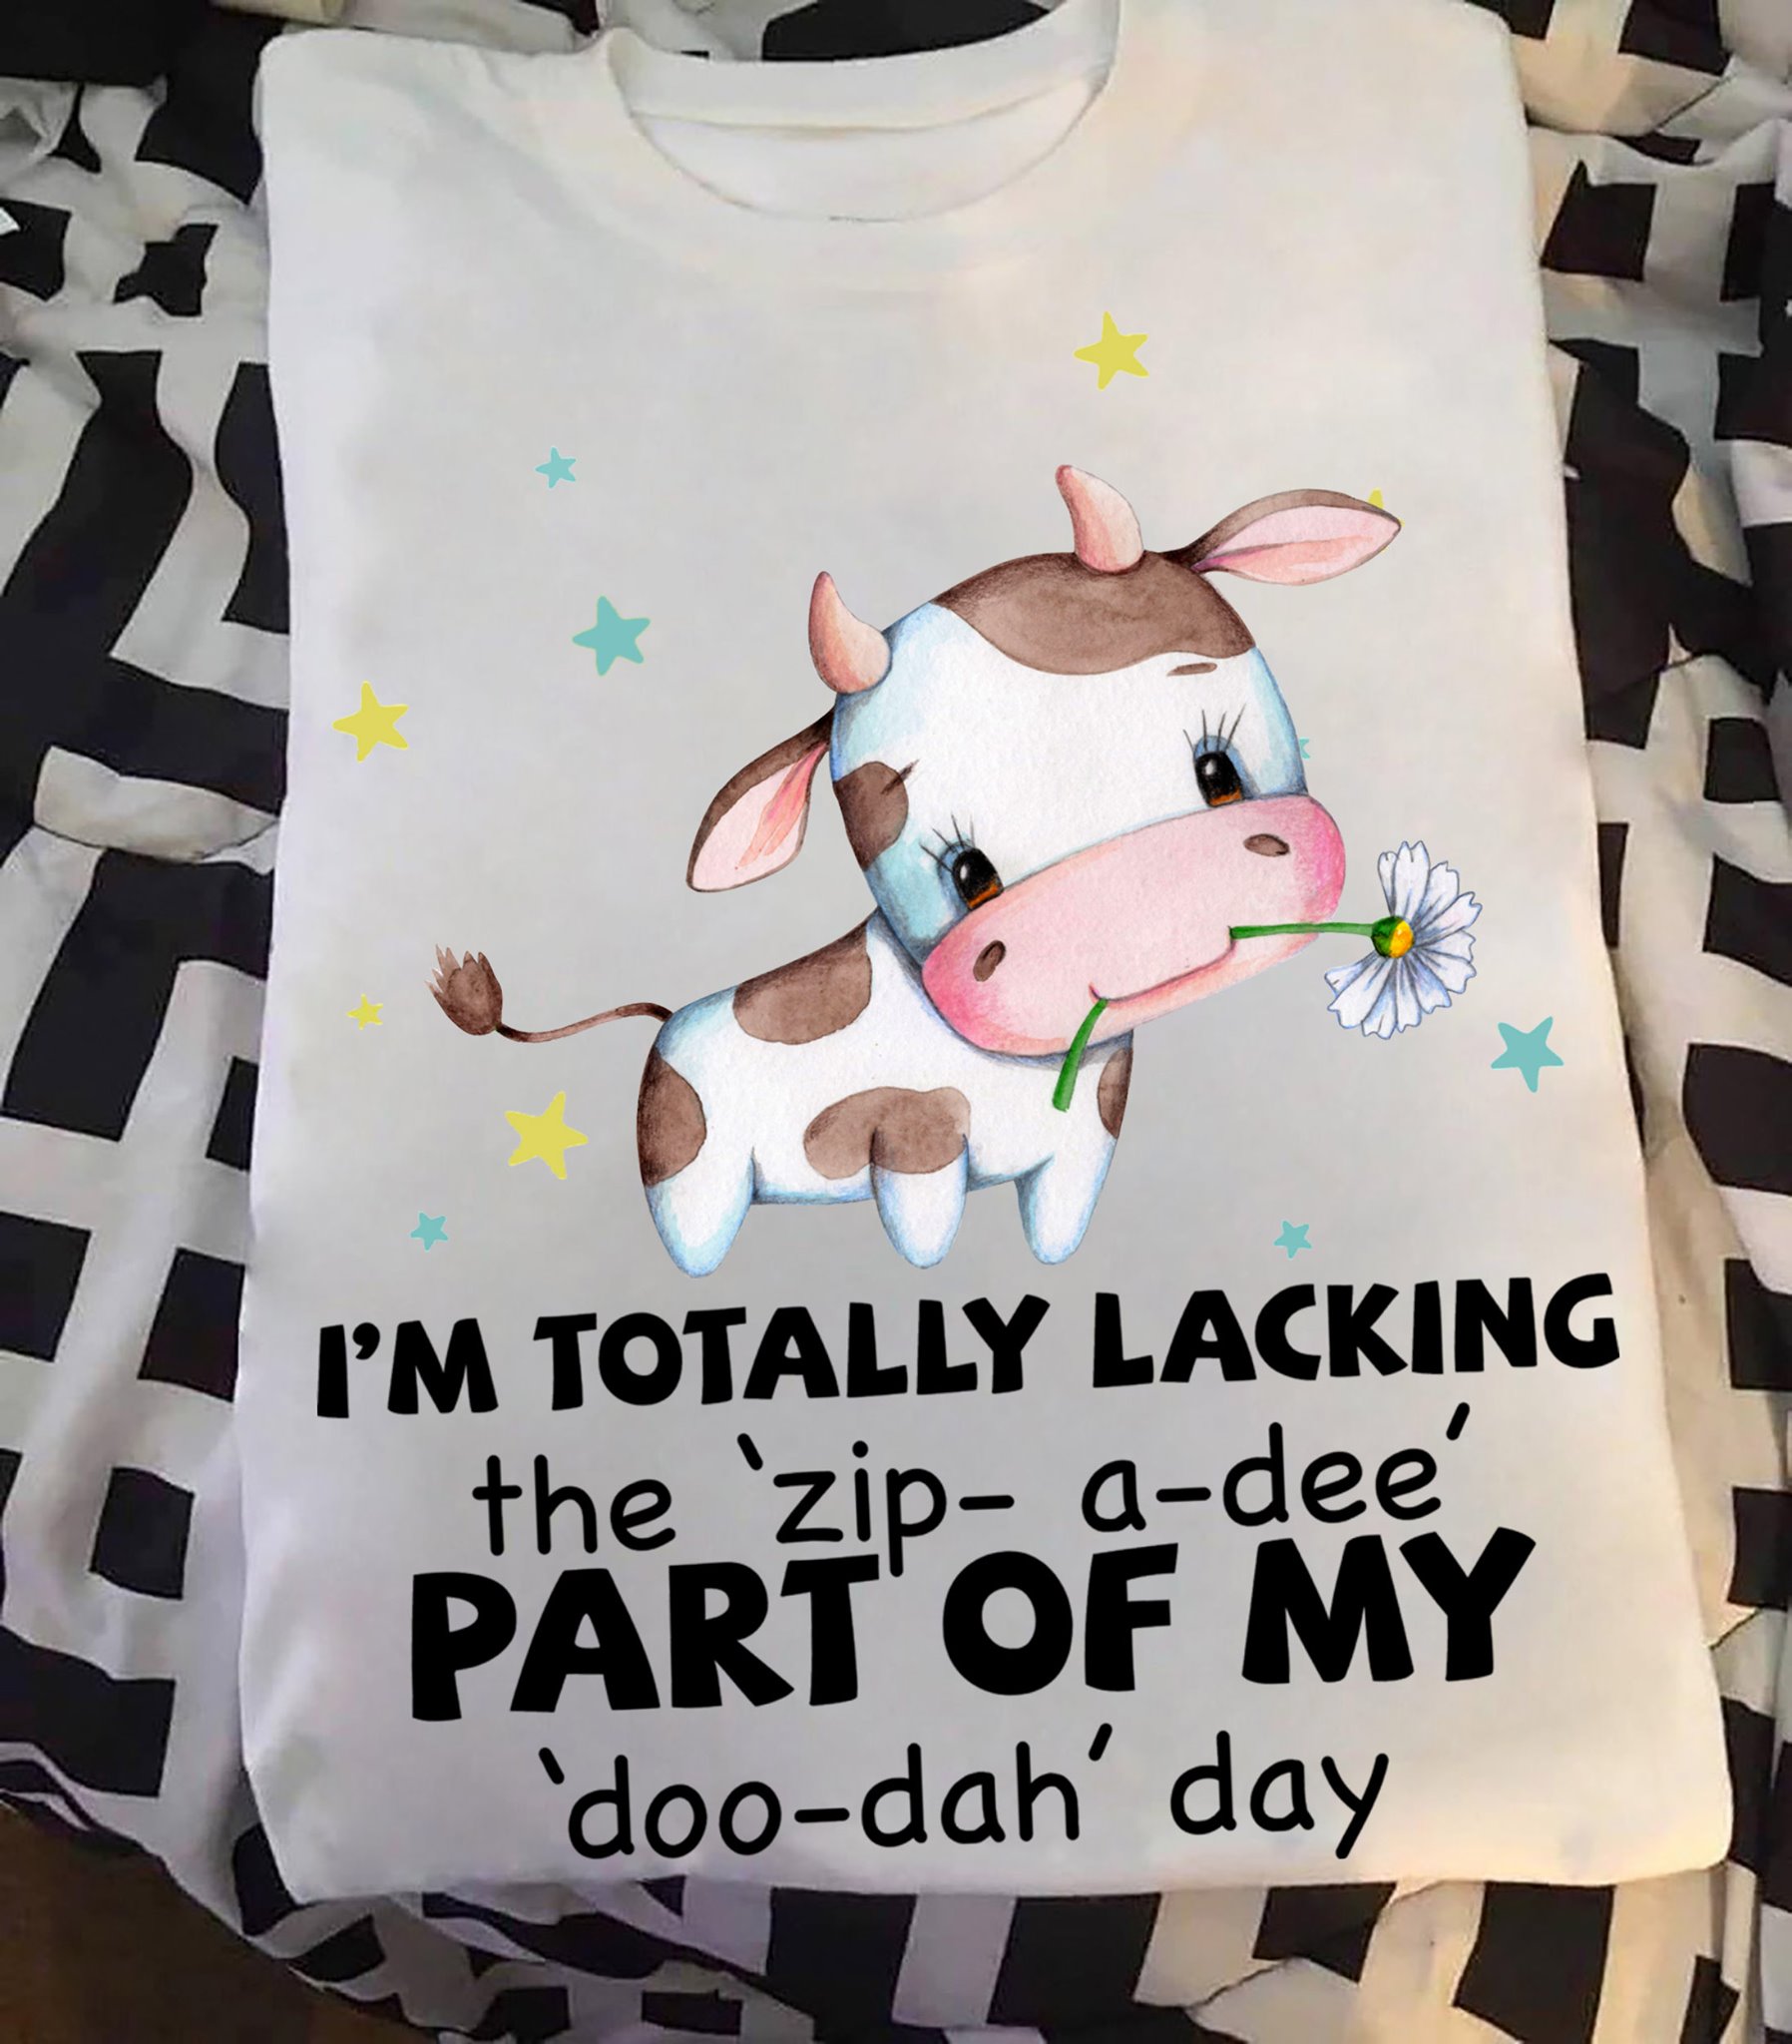 I'm totally lacking the zip-a-dee part of my doo-dah day - Cow lover